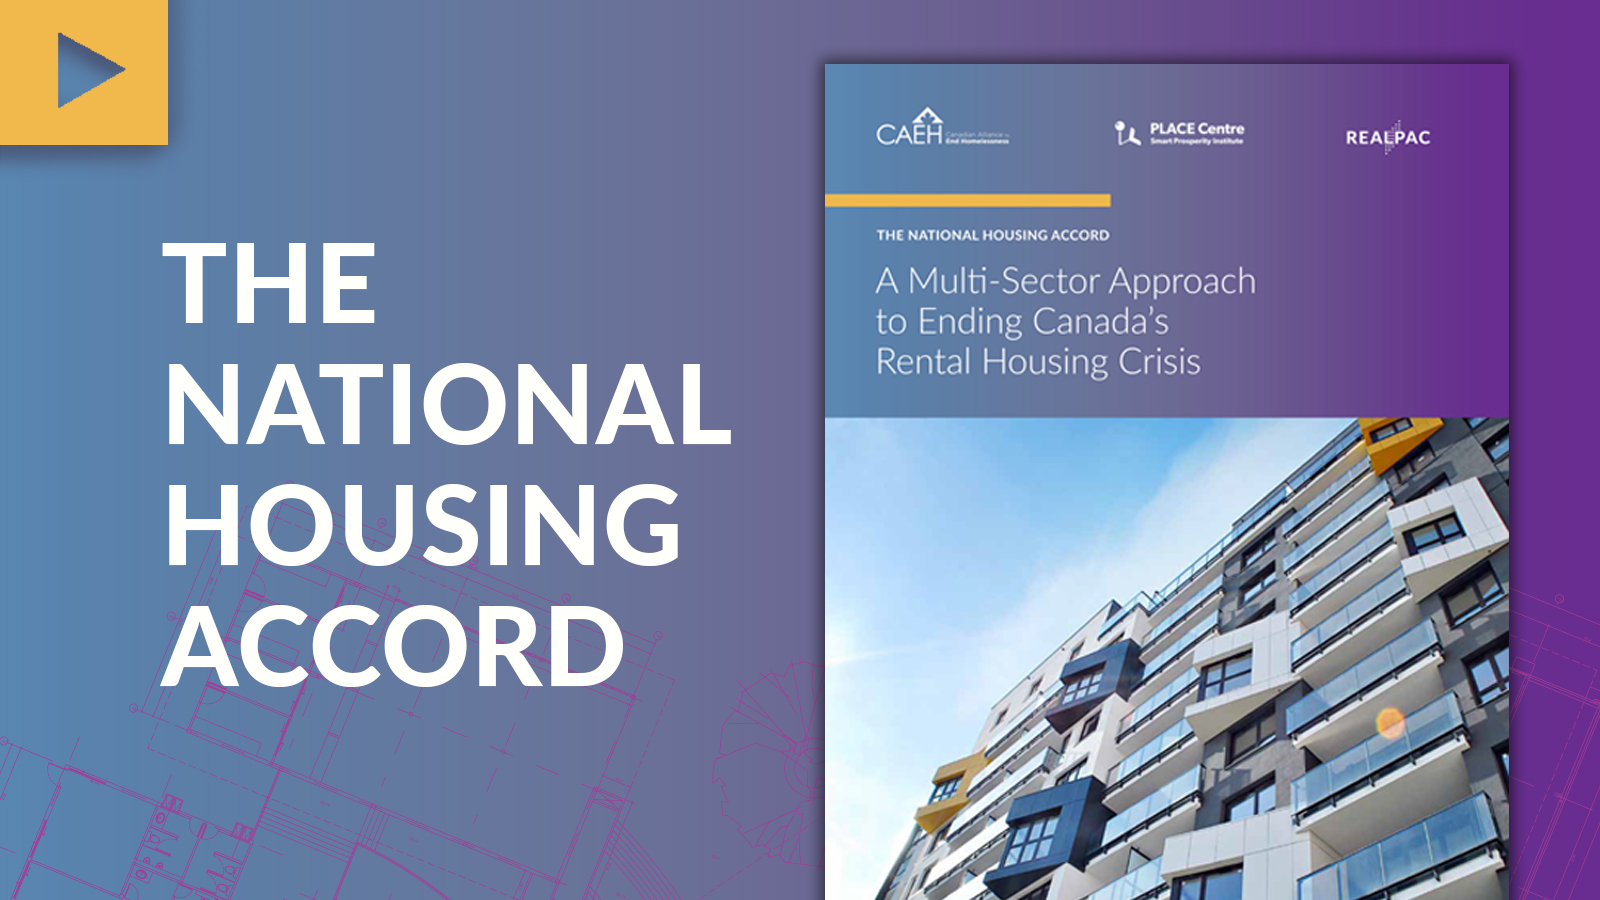 The National Housing Accord